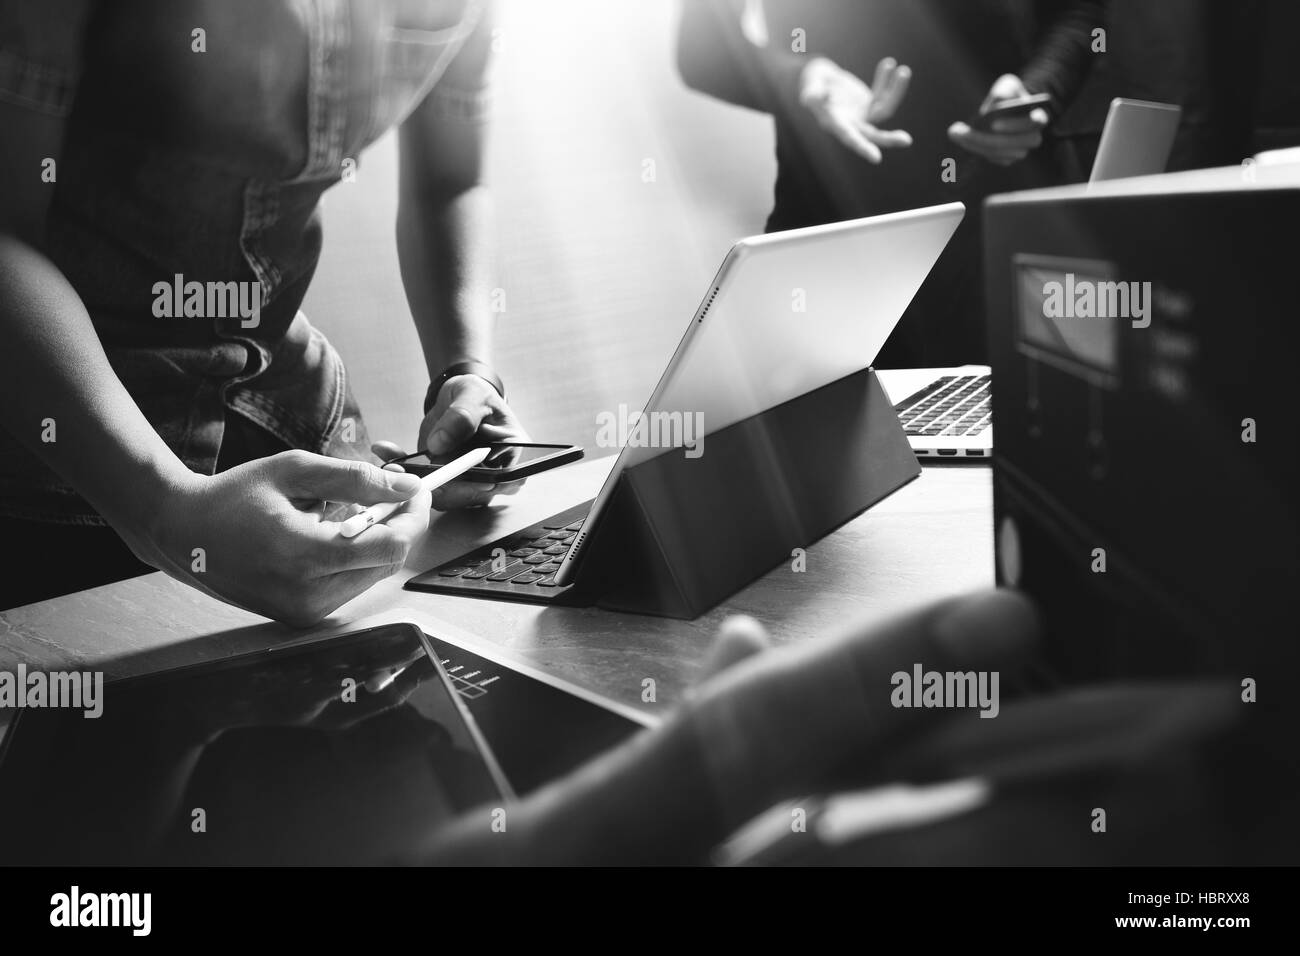 StartUp Programming Team. Website designer working digital tablet dock keyboard and computer laptop with smart phone and compact server on mable desk, Stock Photo